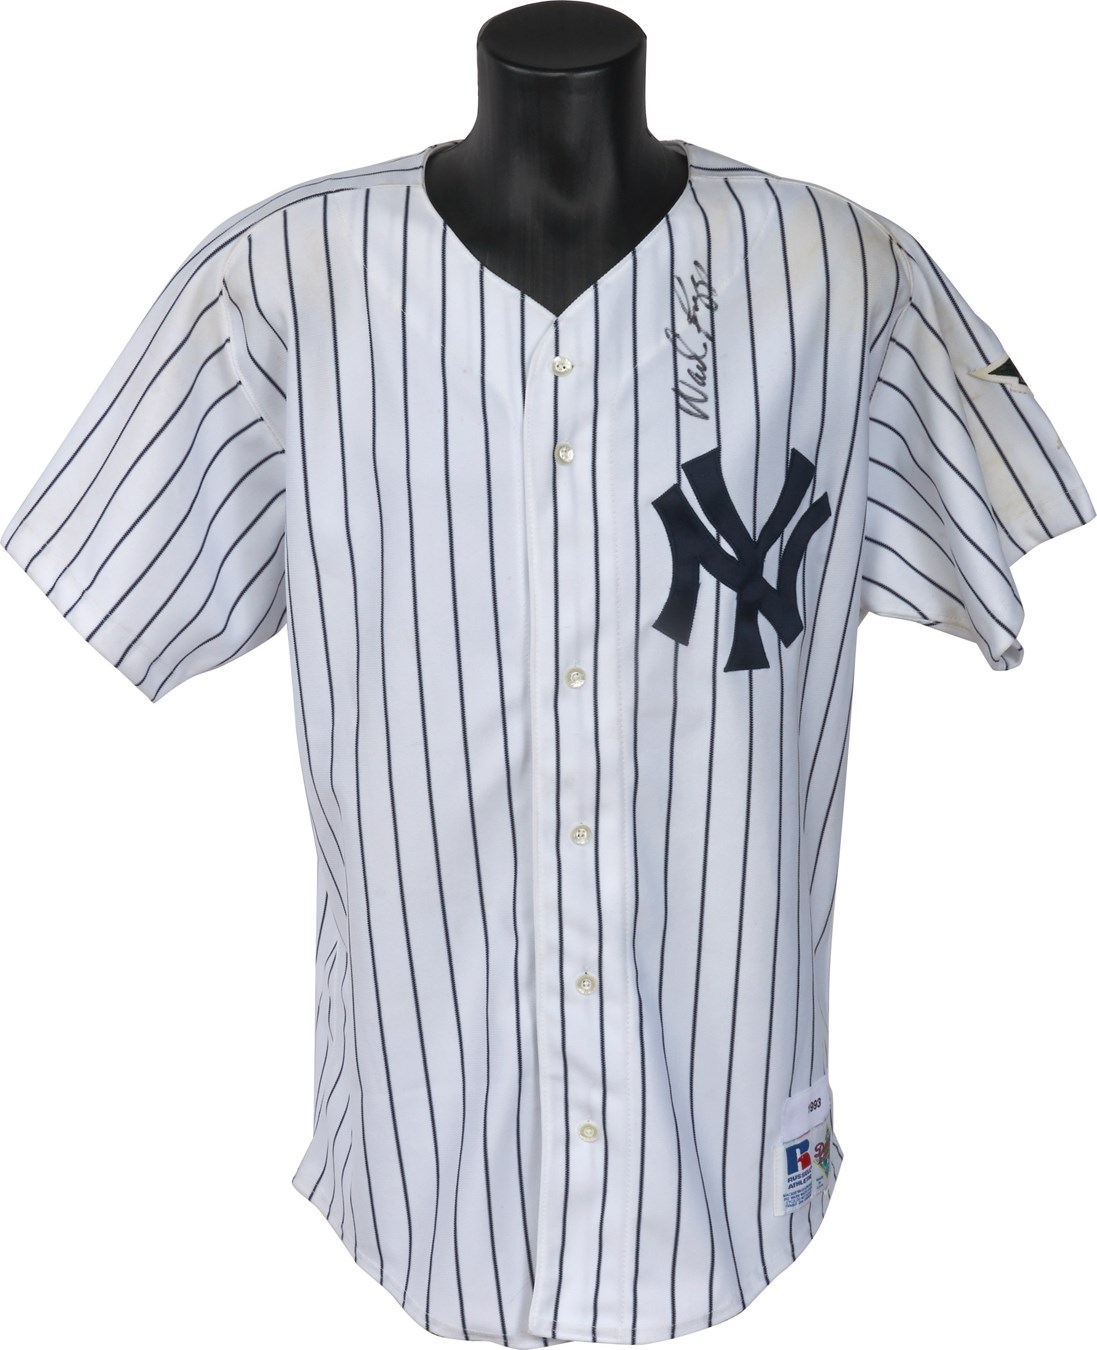 1993 Wade Boggs New York Yankees All-Star Game Worn Jersey (Photomatched)